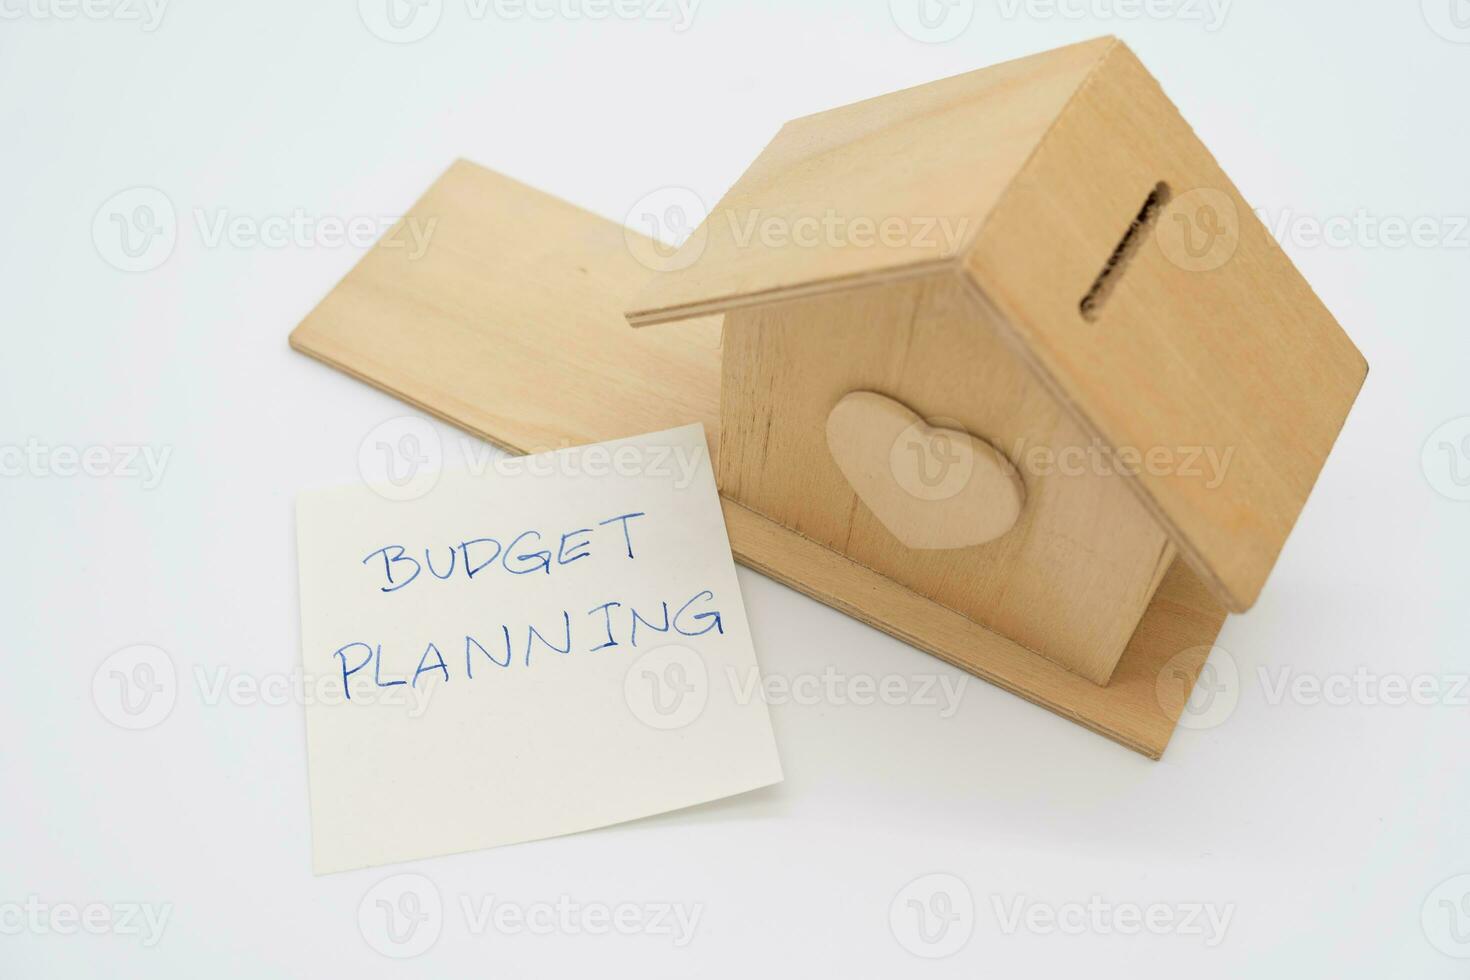 Budget planning for buying a Home. concept of saving money to buy an apartment, house or other residential property. real estate concept. photo